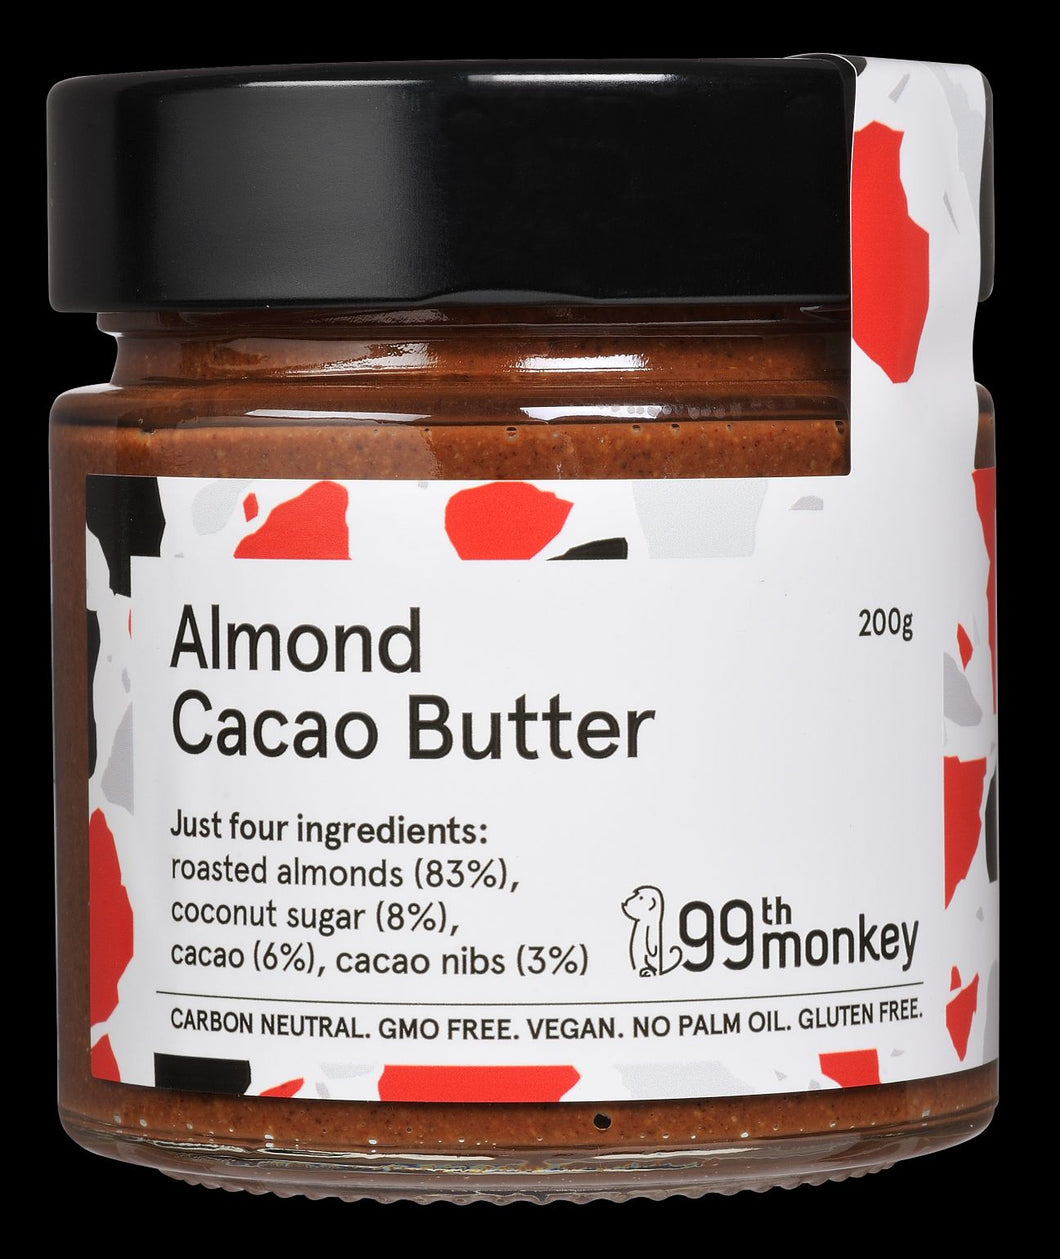 99th Monkey - Almond Cacao Butter 6 x 200g